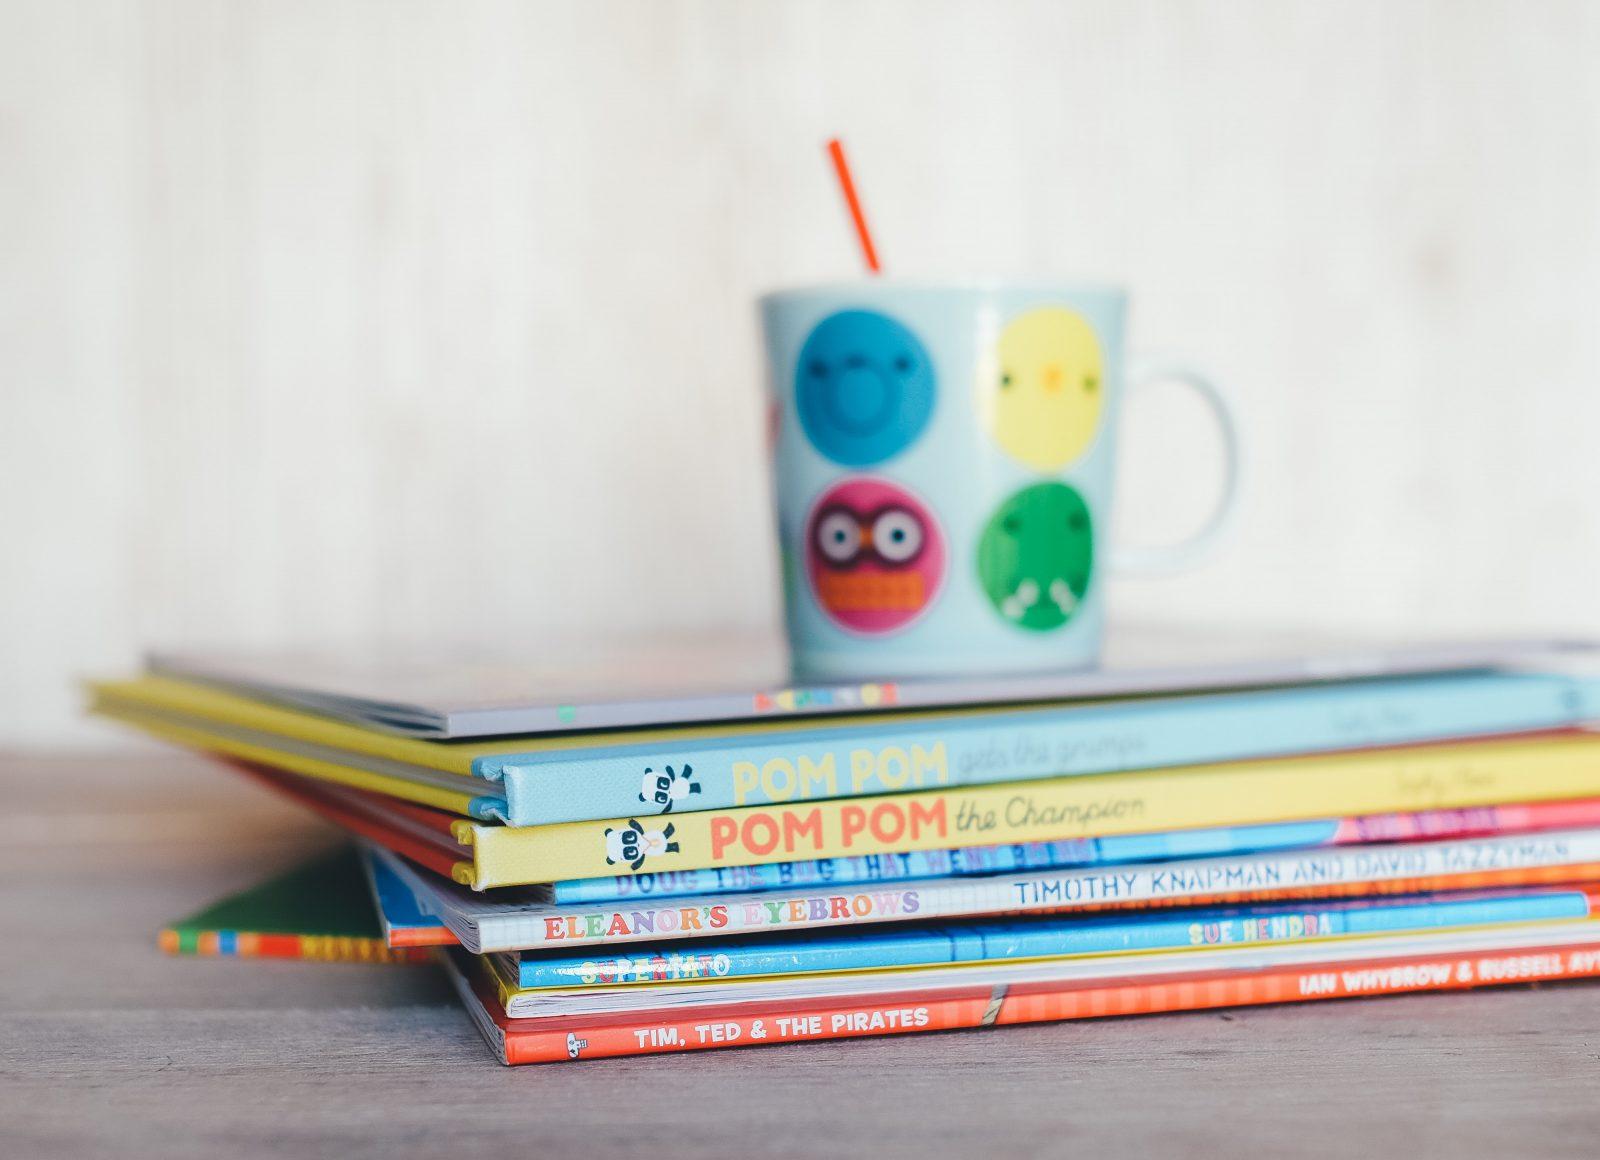 Photograph of children's books stacked, with a colourful cup on top